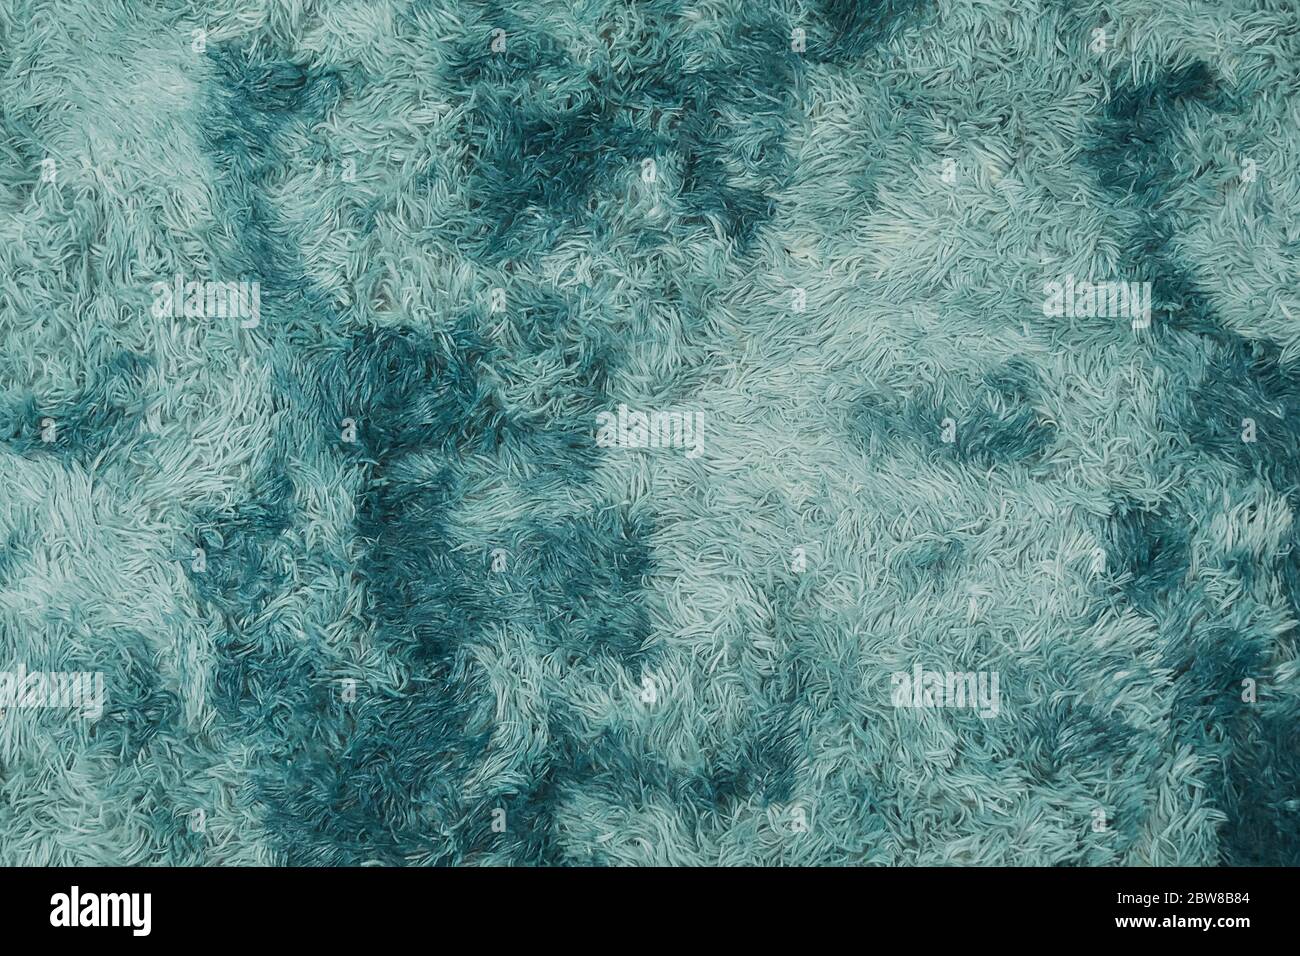 top view carpet texture detail,Carpet is a virtual magnet for allergens like dust mites, pet dander, mold spores and other potentially aggravating Stock Photo